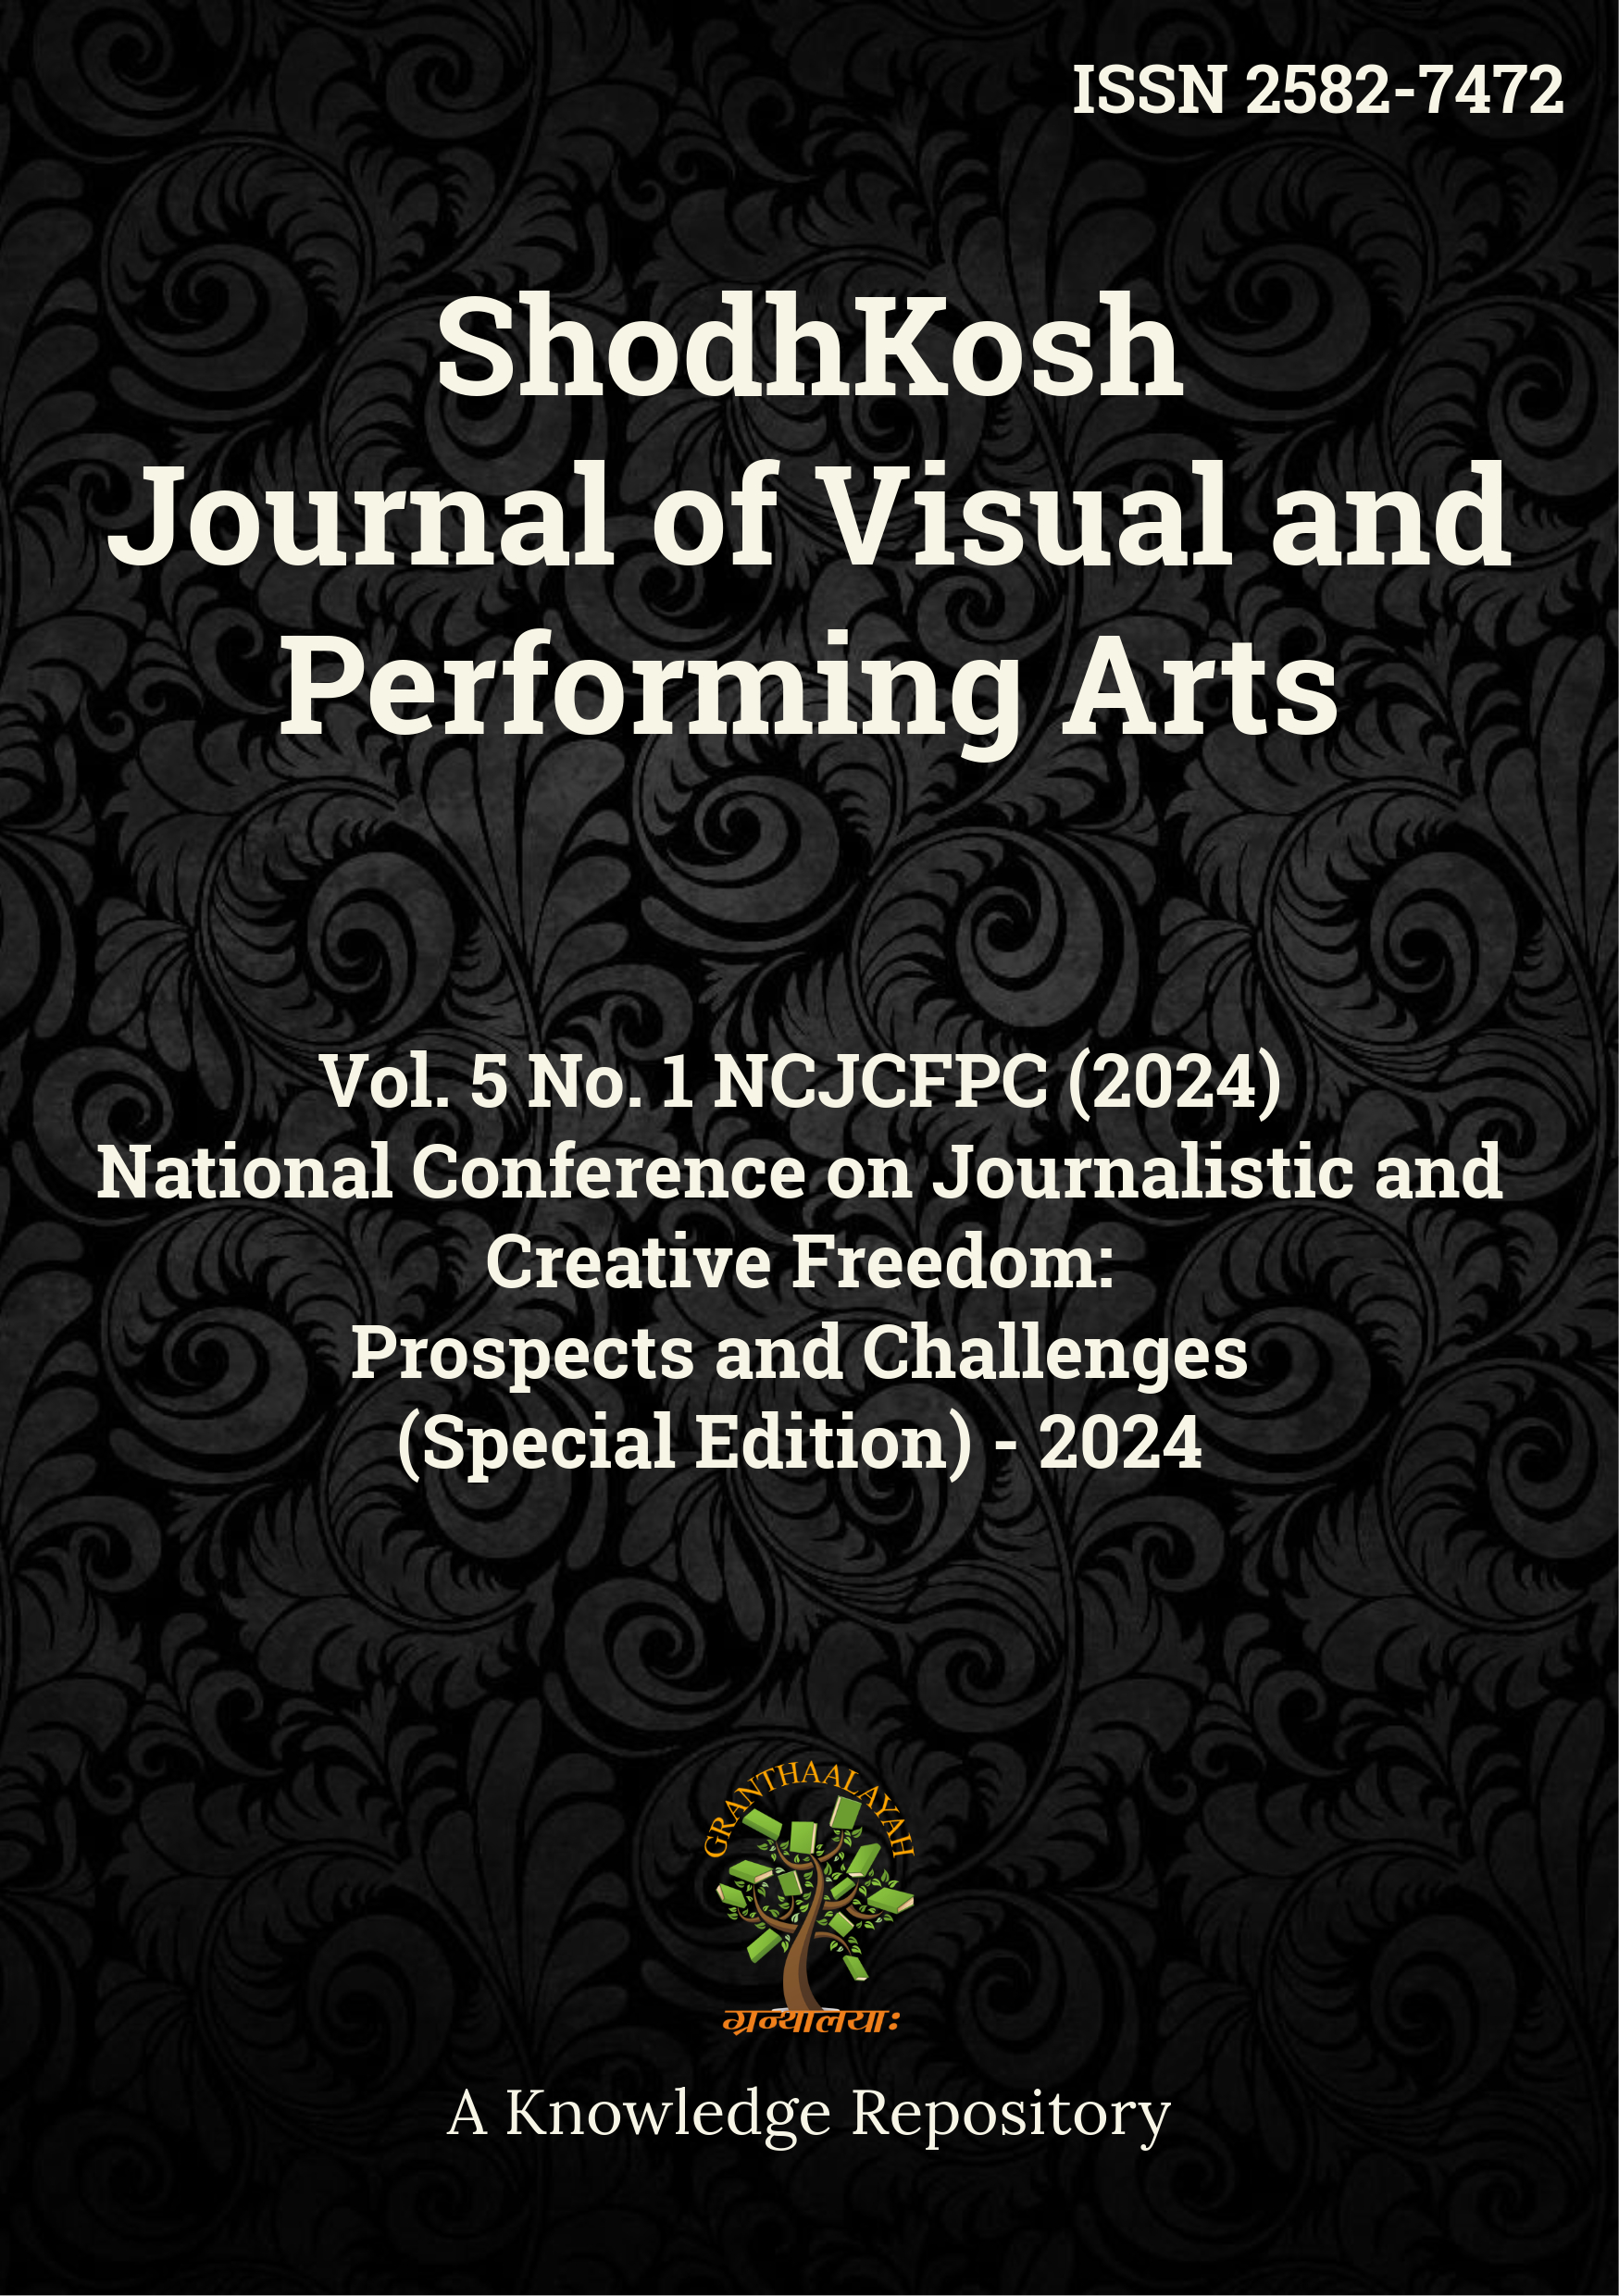 					View Vol. 5 No. 1NCJCFPC (2024): National Conference on Journalistic and Creative Freedom: Prospects and Challenges
				